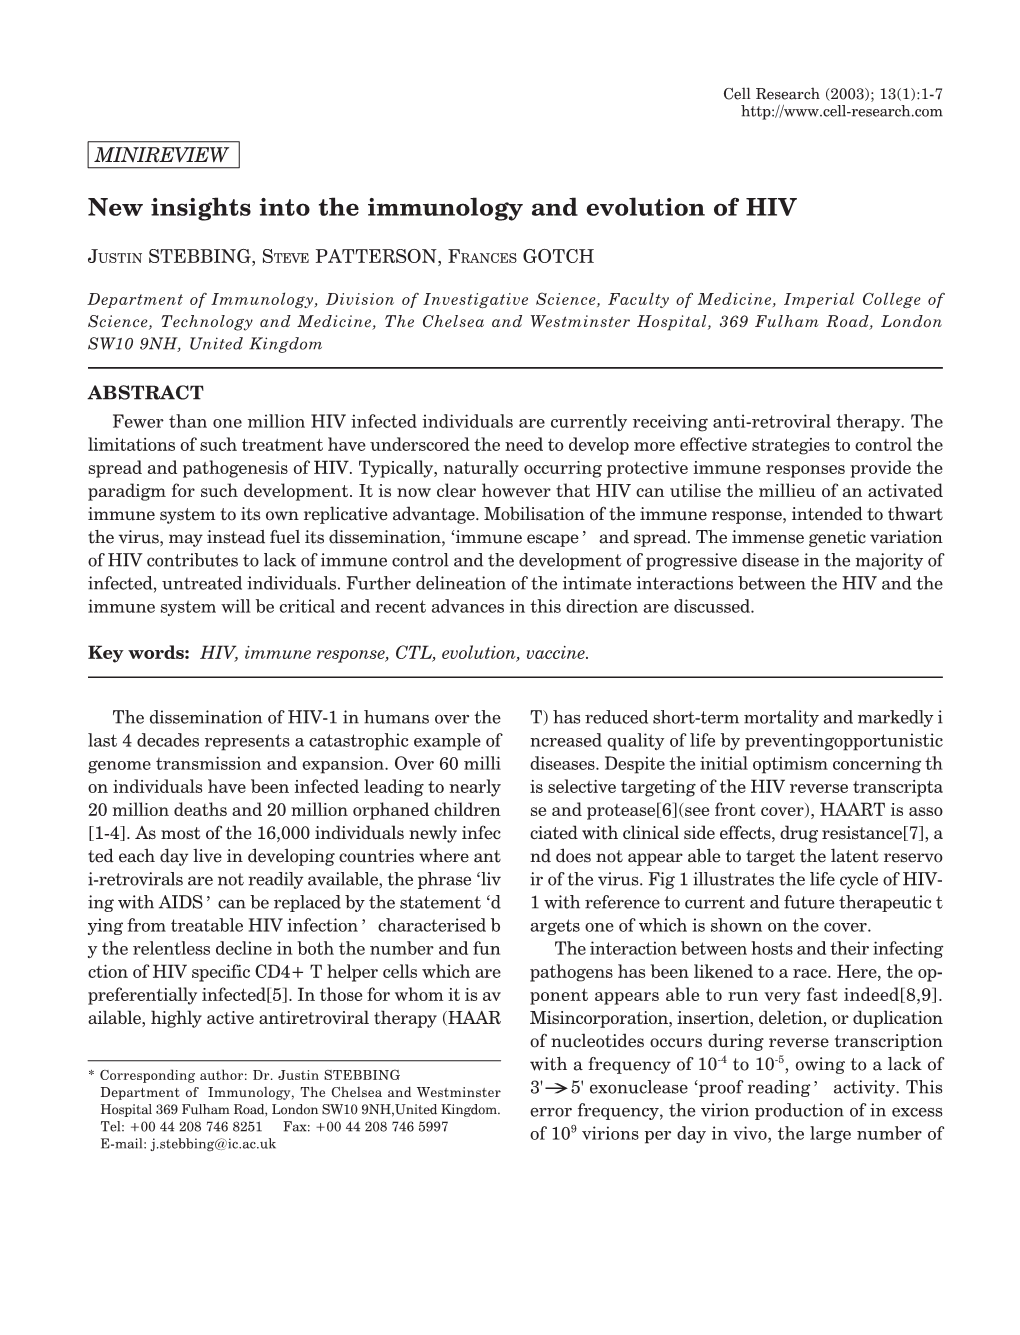 New Insights Into the Immunology and Evolution of HIV